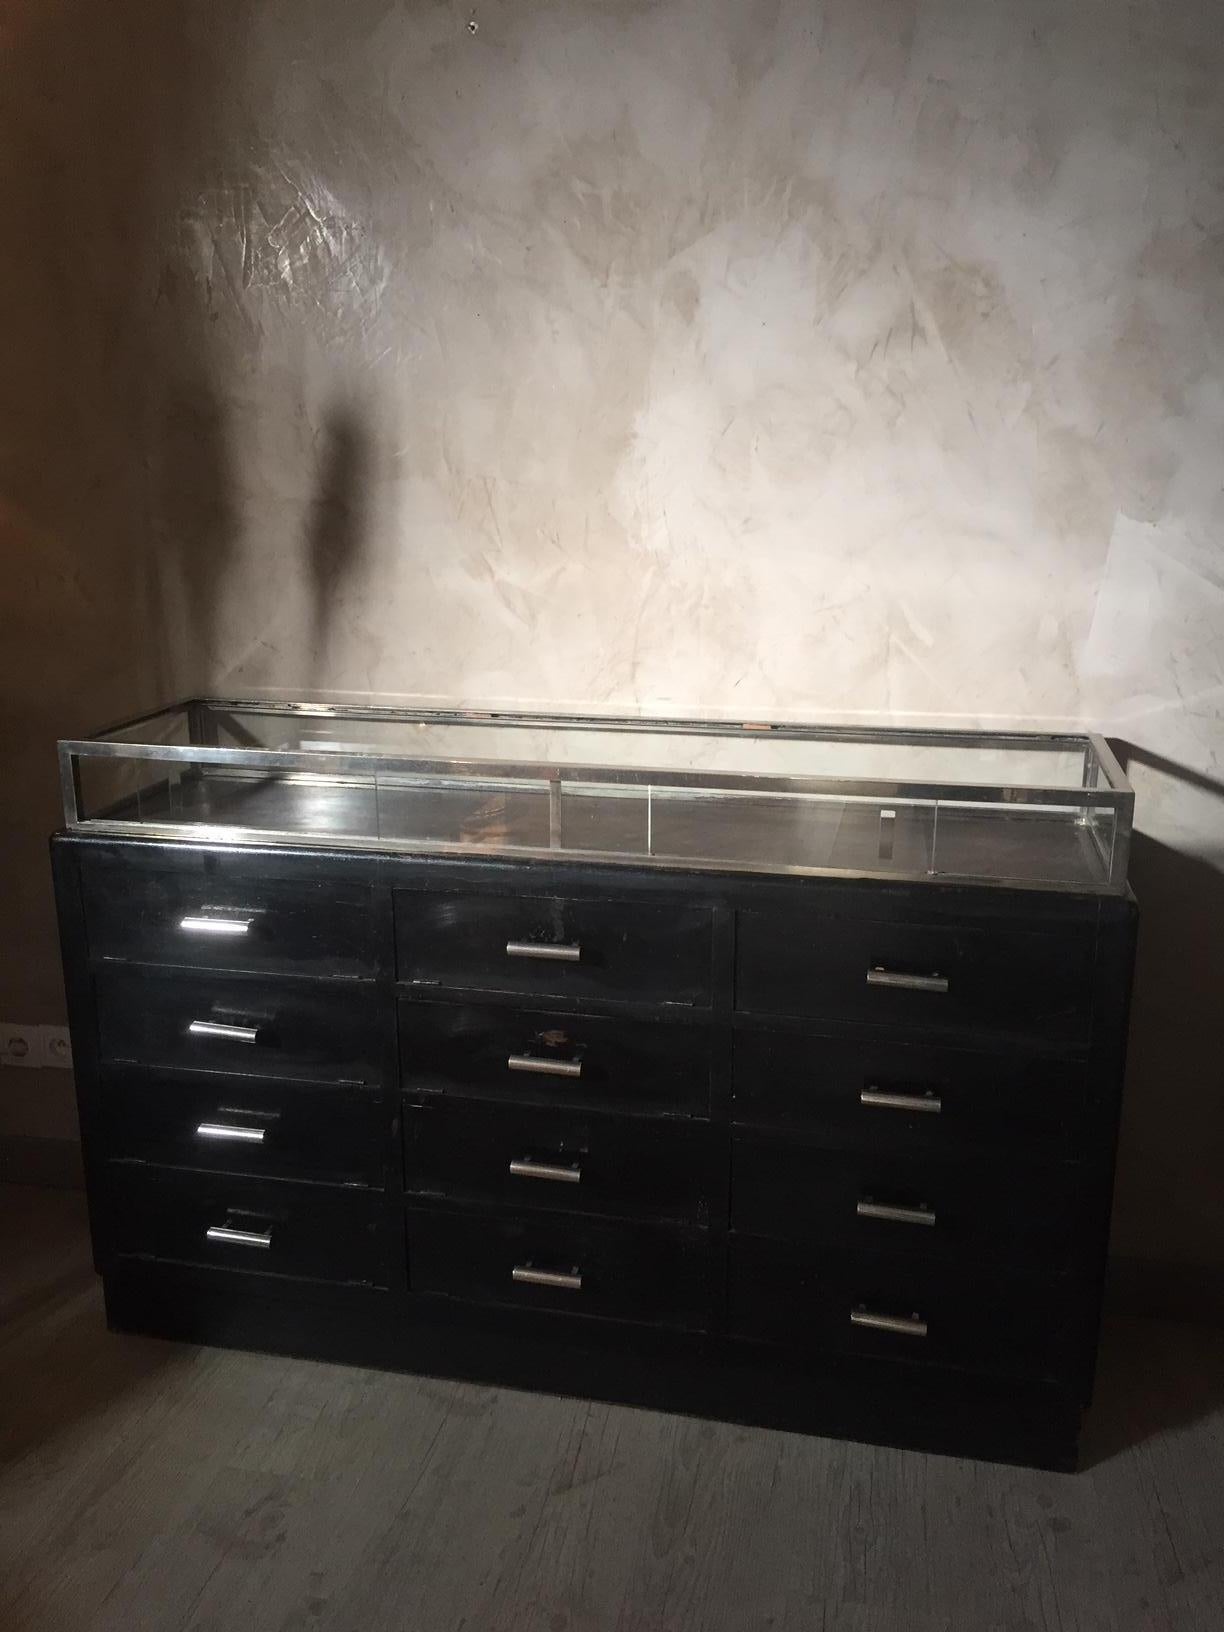 Very nice 20th century French painted Aberdashery vitrine and Chest of drawers from the 1920s. Very nice Black patina. 
Maybe a gloves cabinet. The drawers are 